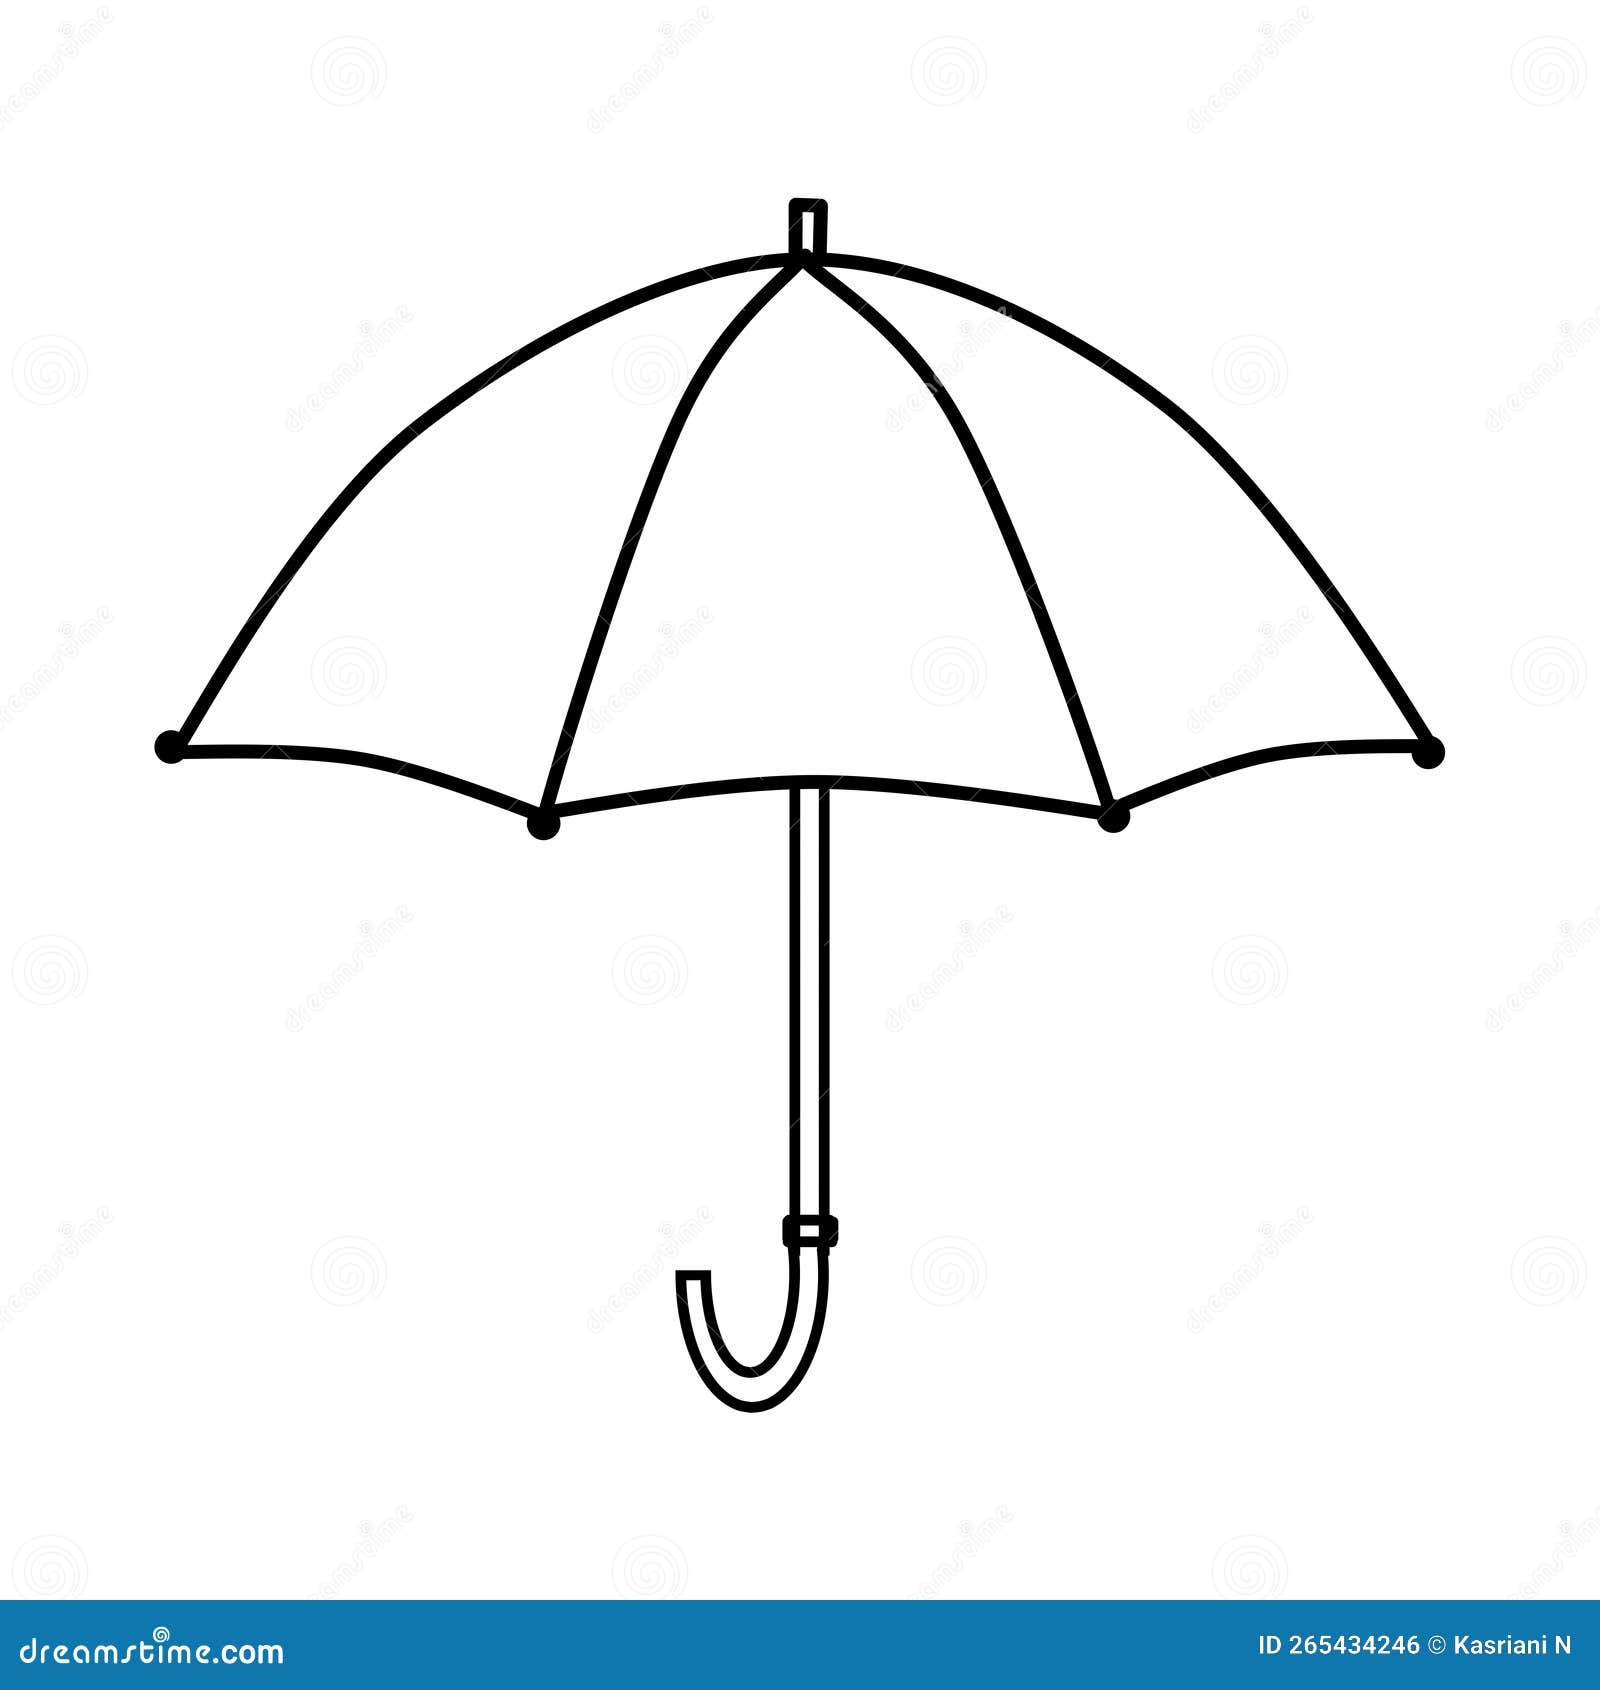 Umbrella Coloring Pages - Best Coloring Pages For Kids  Umbrella coloring  page, Umbrella template, Easy coloring pages